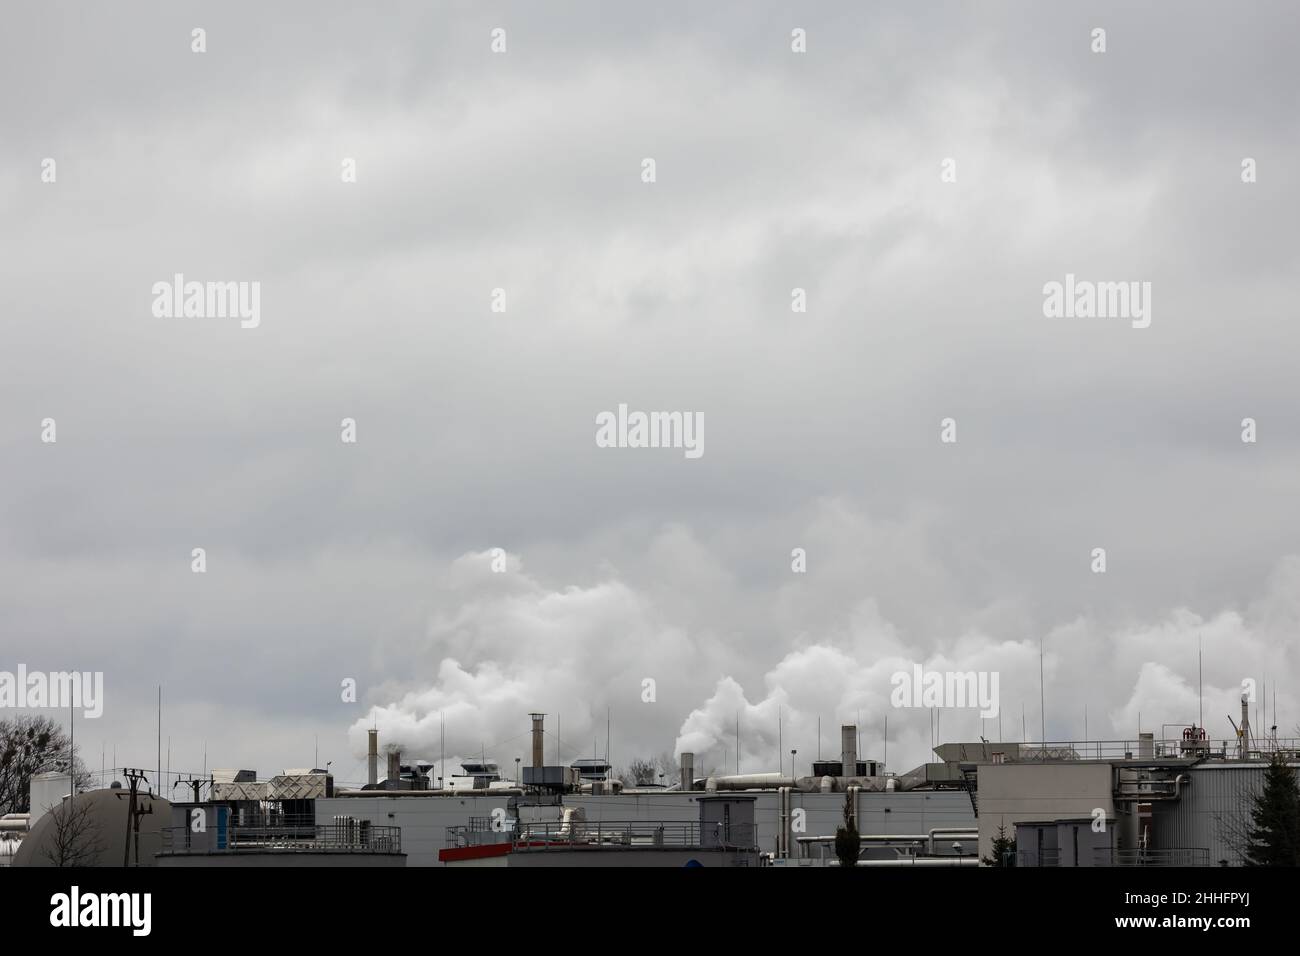 Puffs of steam coming out of chimneys on the roof of an industrial plant. Picture taken on a cloudy day, uniform and soft light. Stock Photo